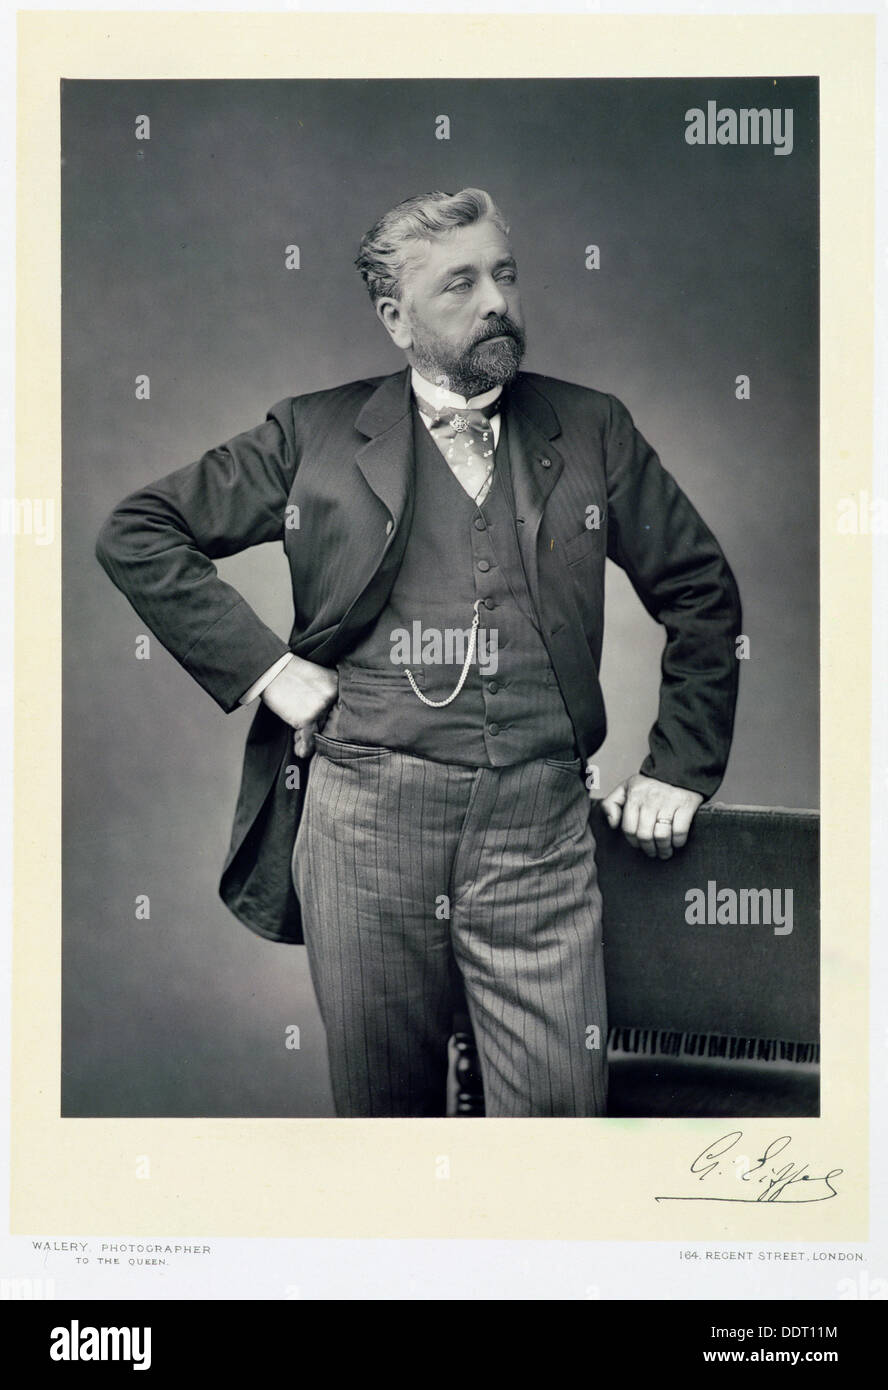 Alexandre Gustave Eiffel, French engineer, late 19th century. Artist: Walery Stock Photo